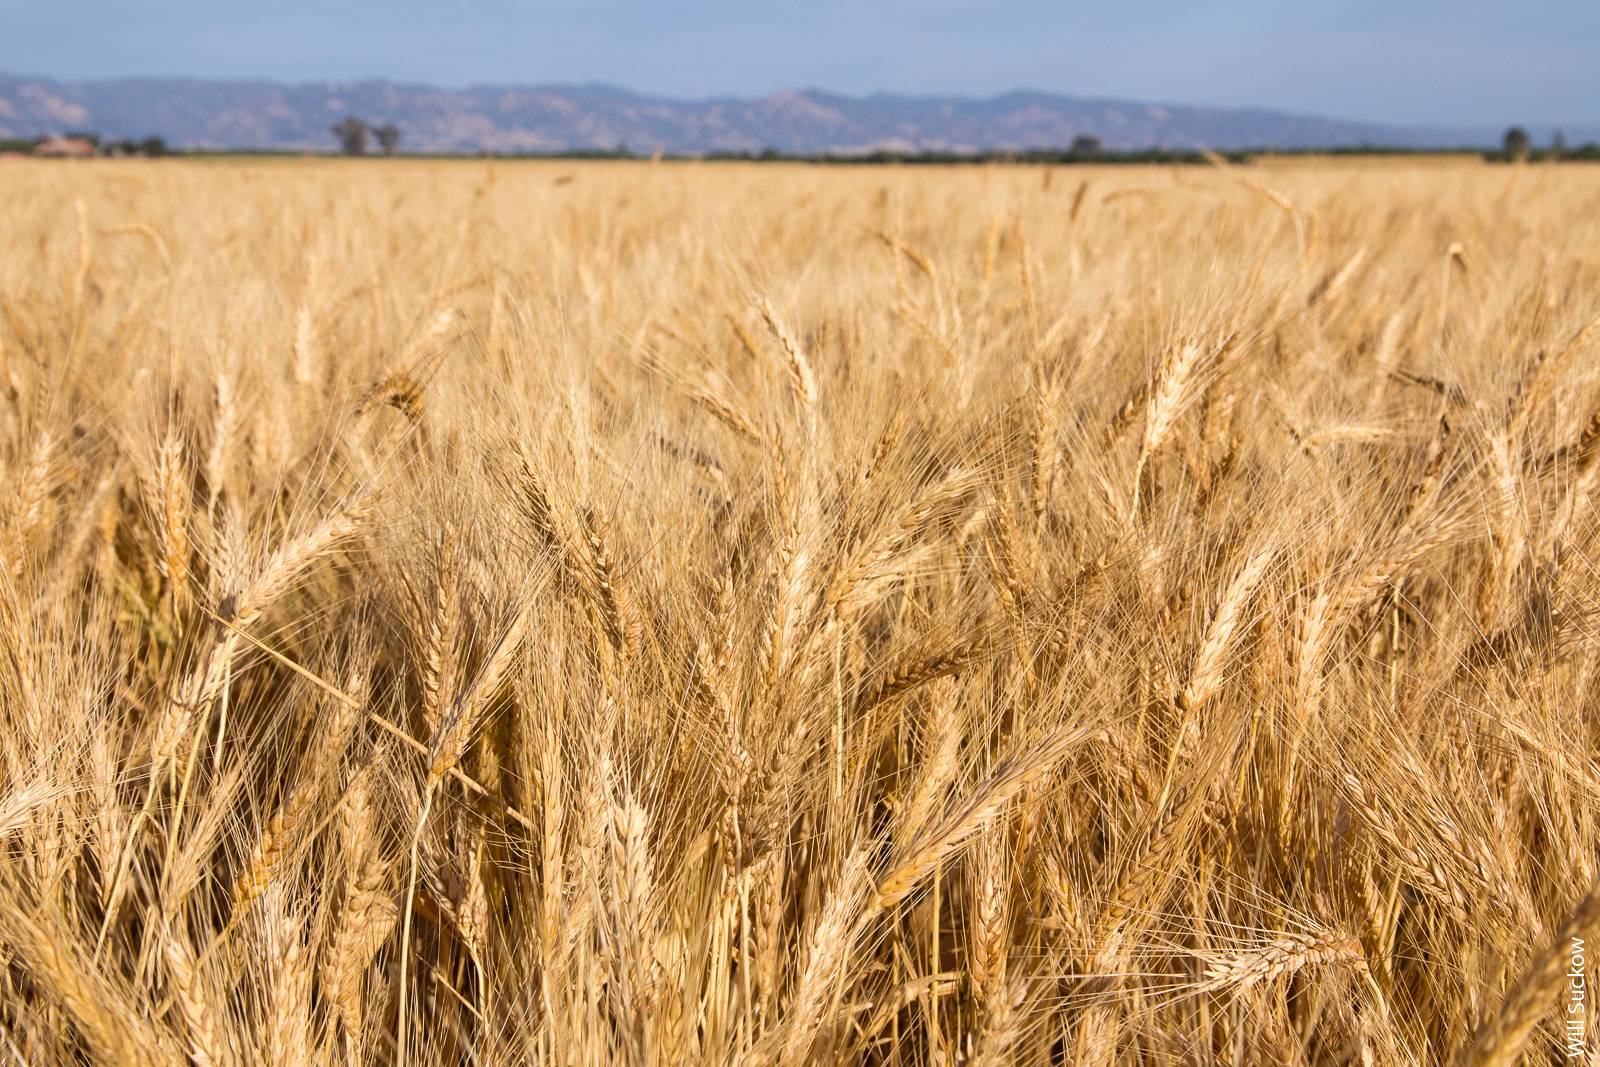 If current climate trends continue and all other variables such as wheat price hold steady, there could be a 45% decline in Yolo County wheat acreage by 2050.